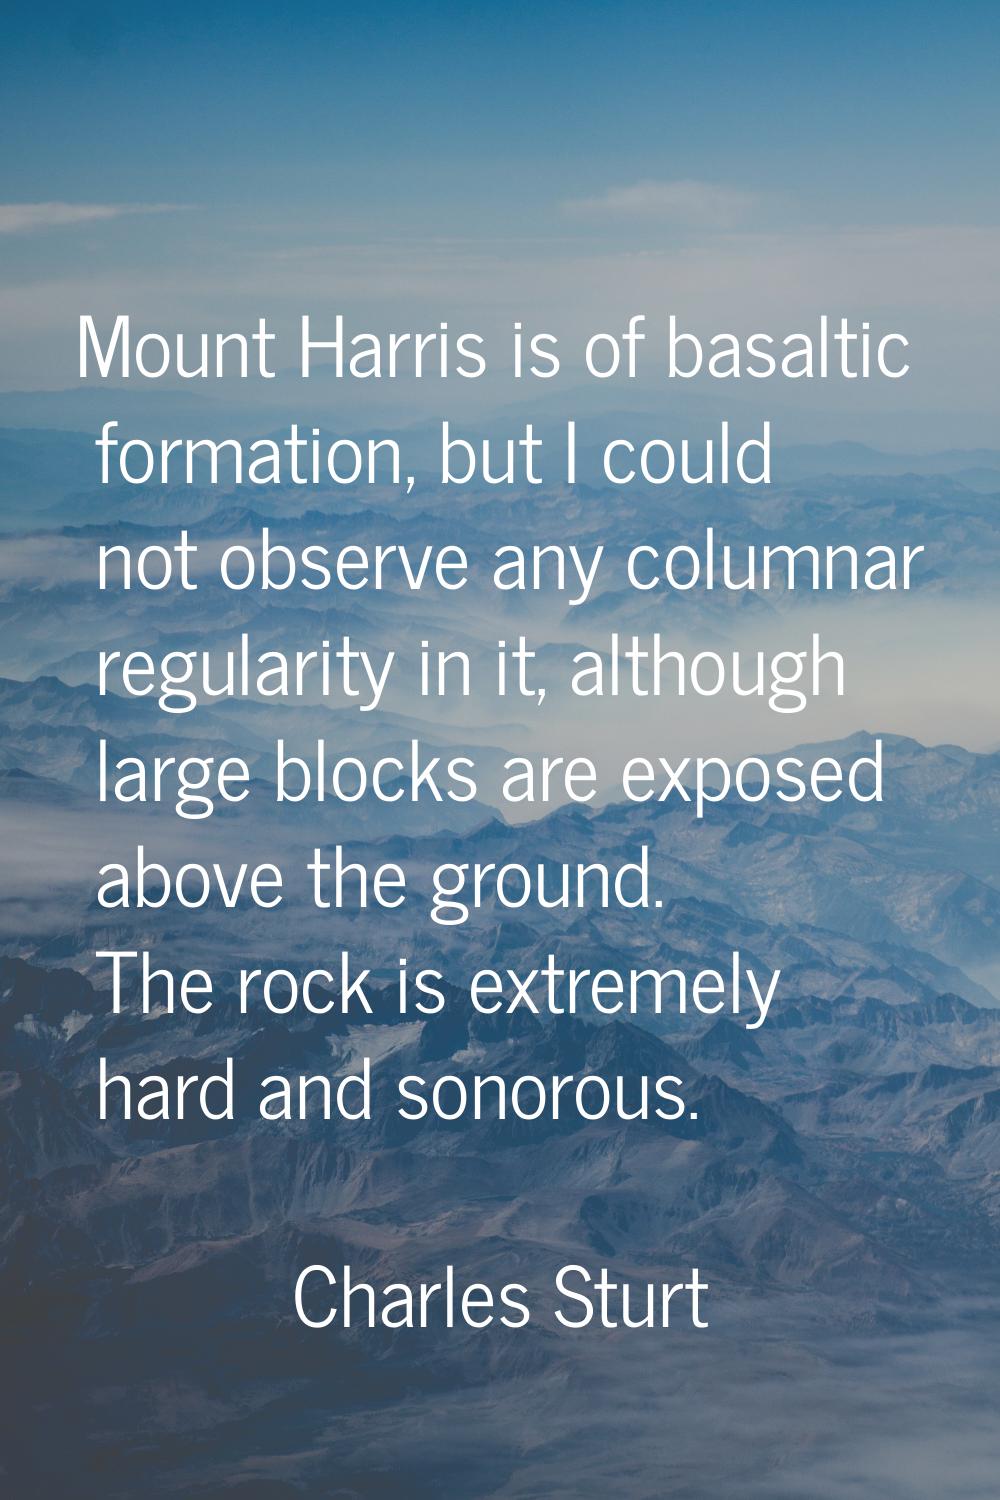 Mount Harris is of basaltic formation, but I could not observe any columnar regularity in it, altho